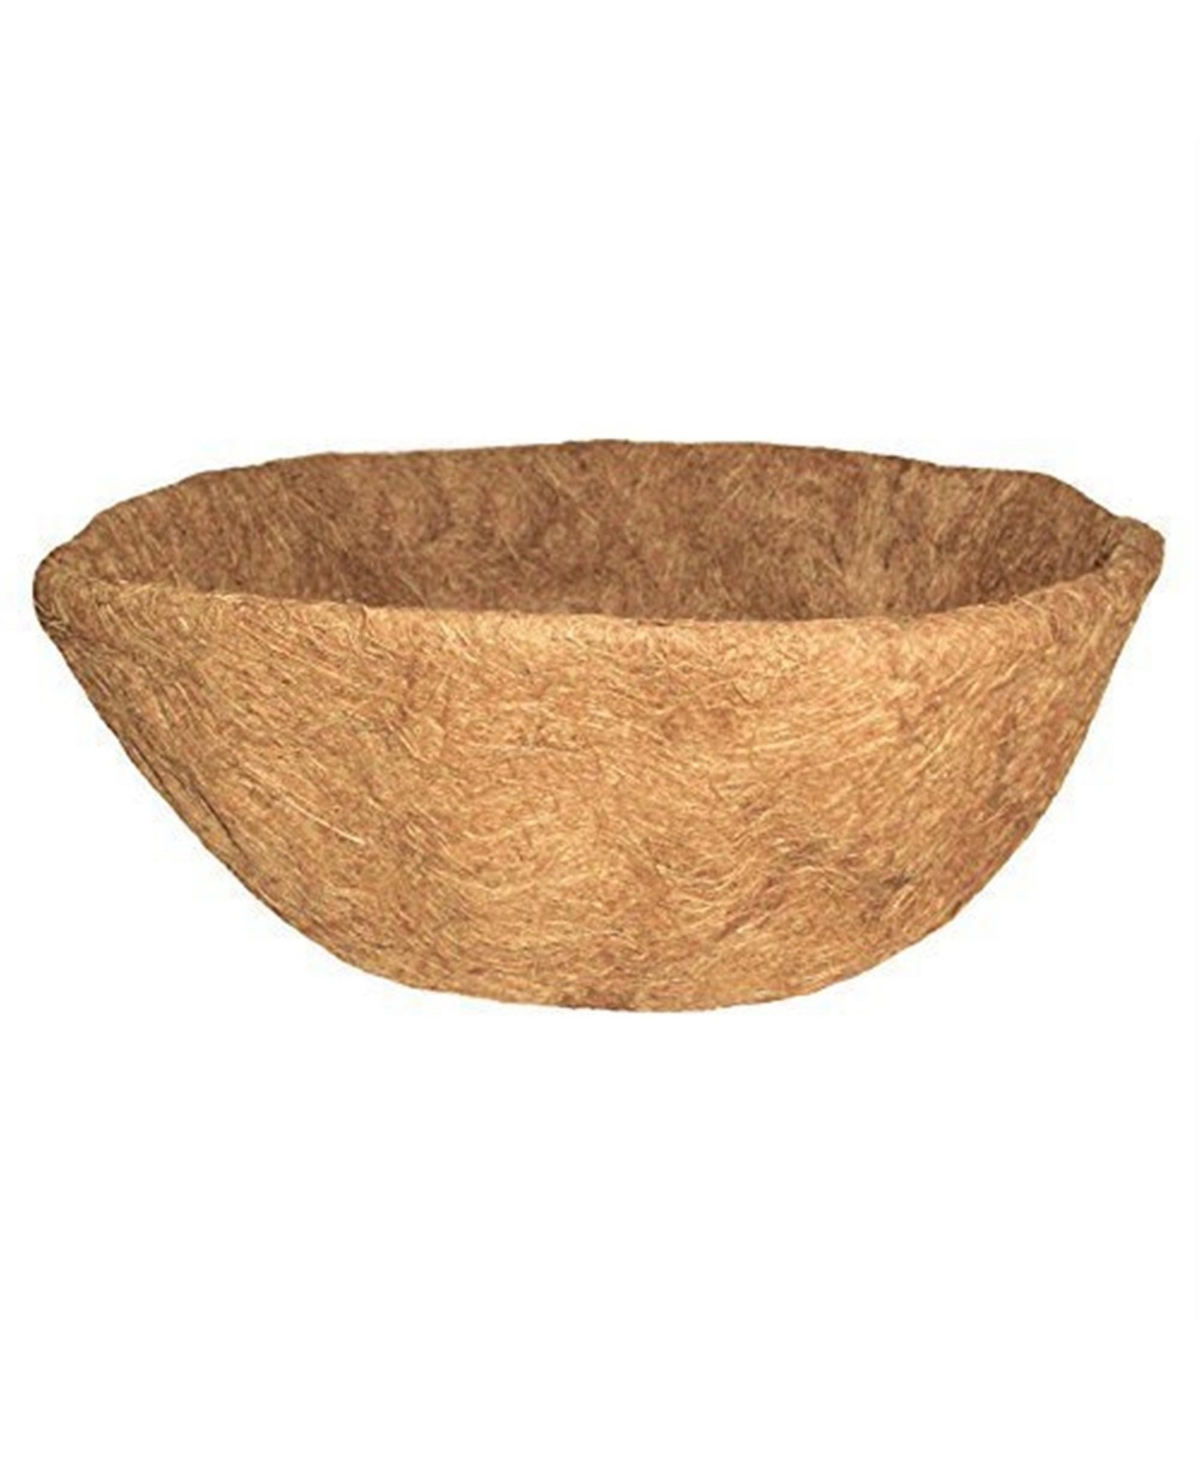 Coconut Arts Basket Shaped Coco Liner, 14 inches - Brown